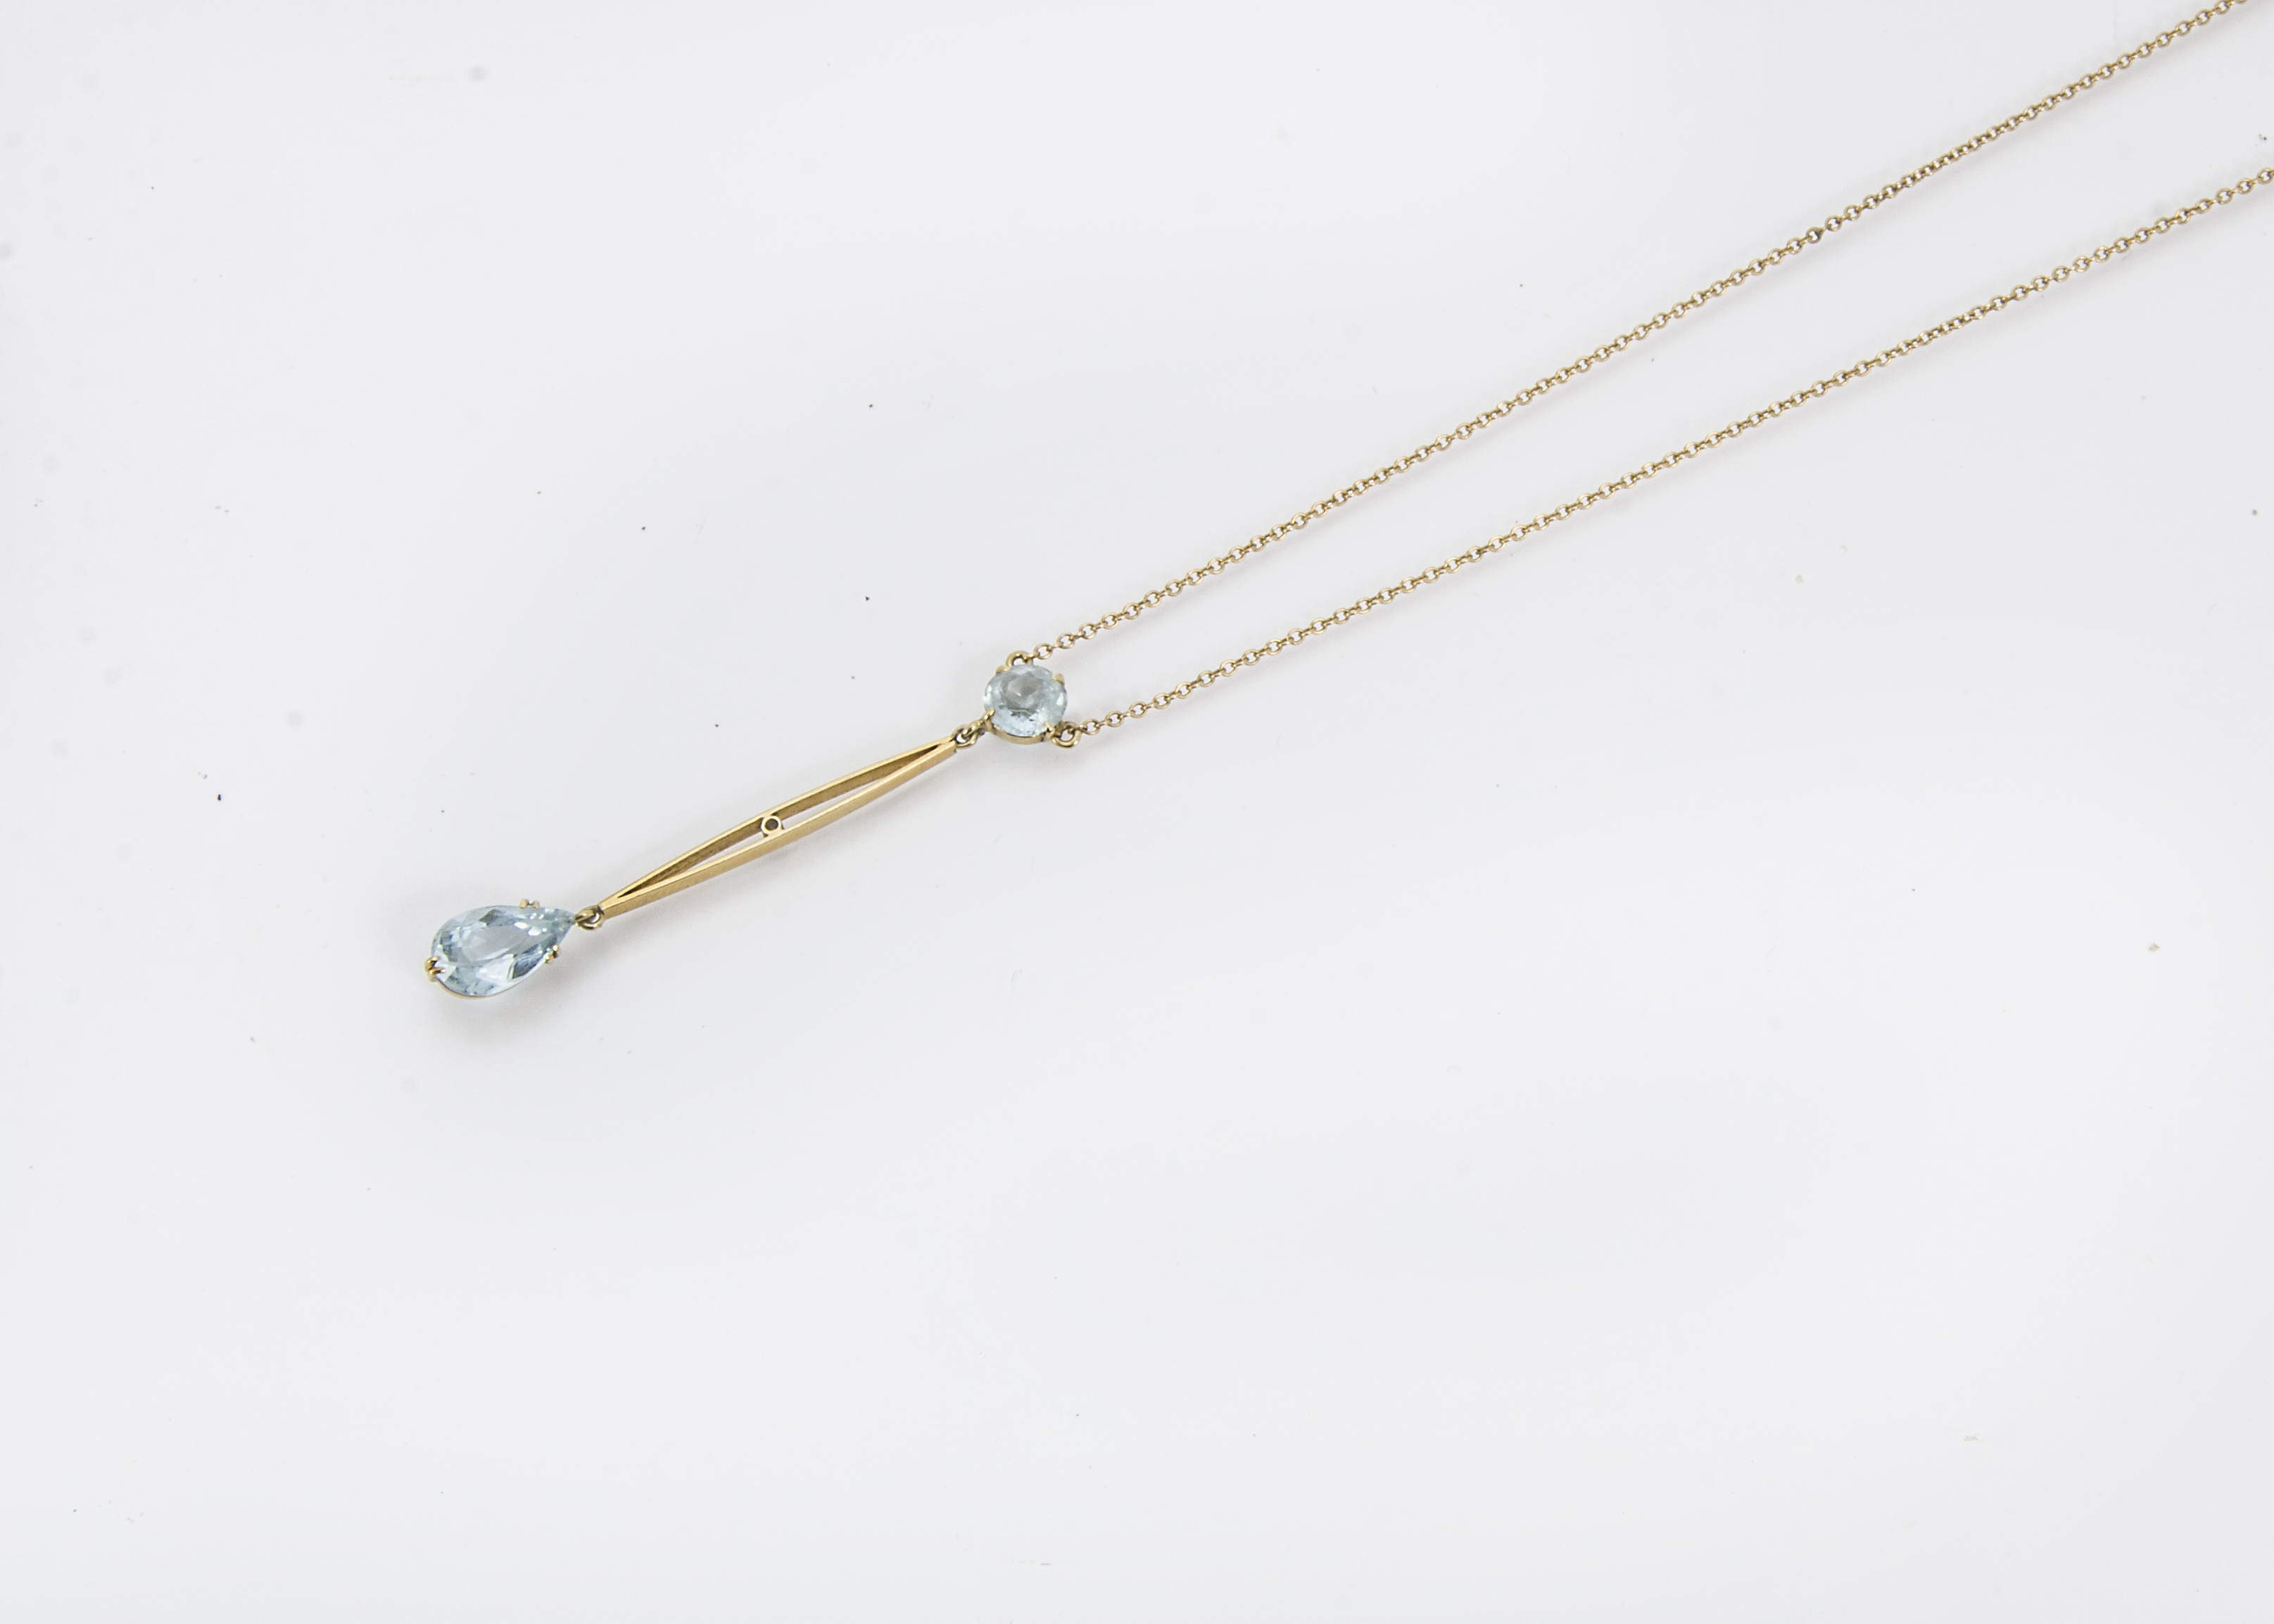 An Edwardian 15ct gold and aquamarine necklace, the chain supporting a round cut light blue stone